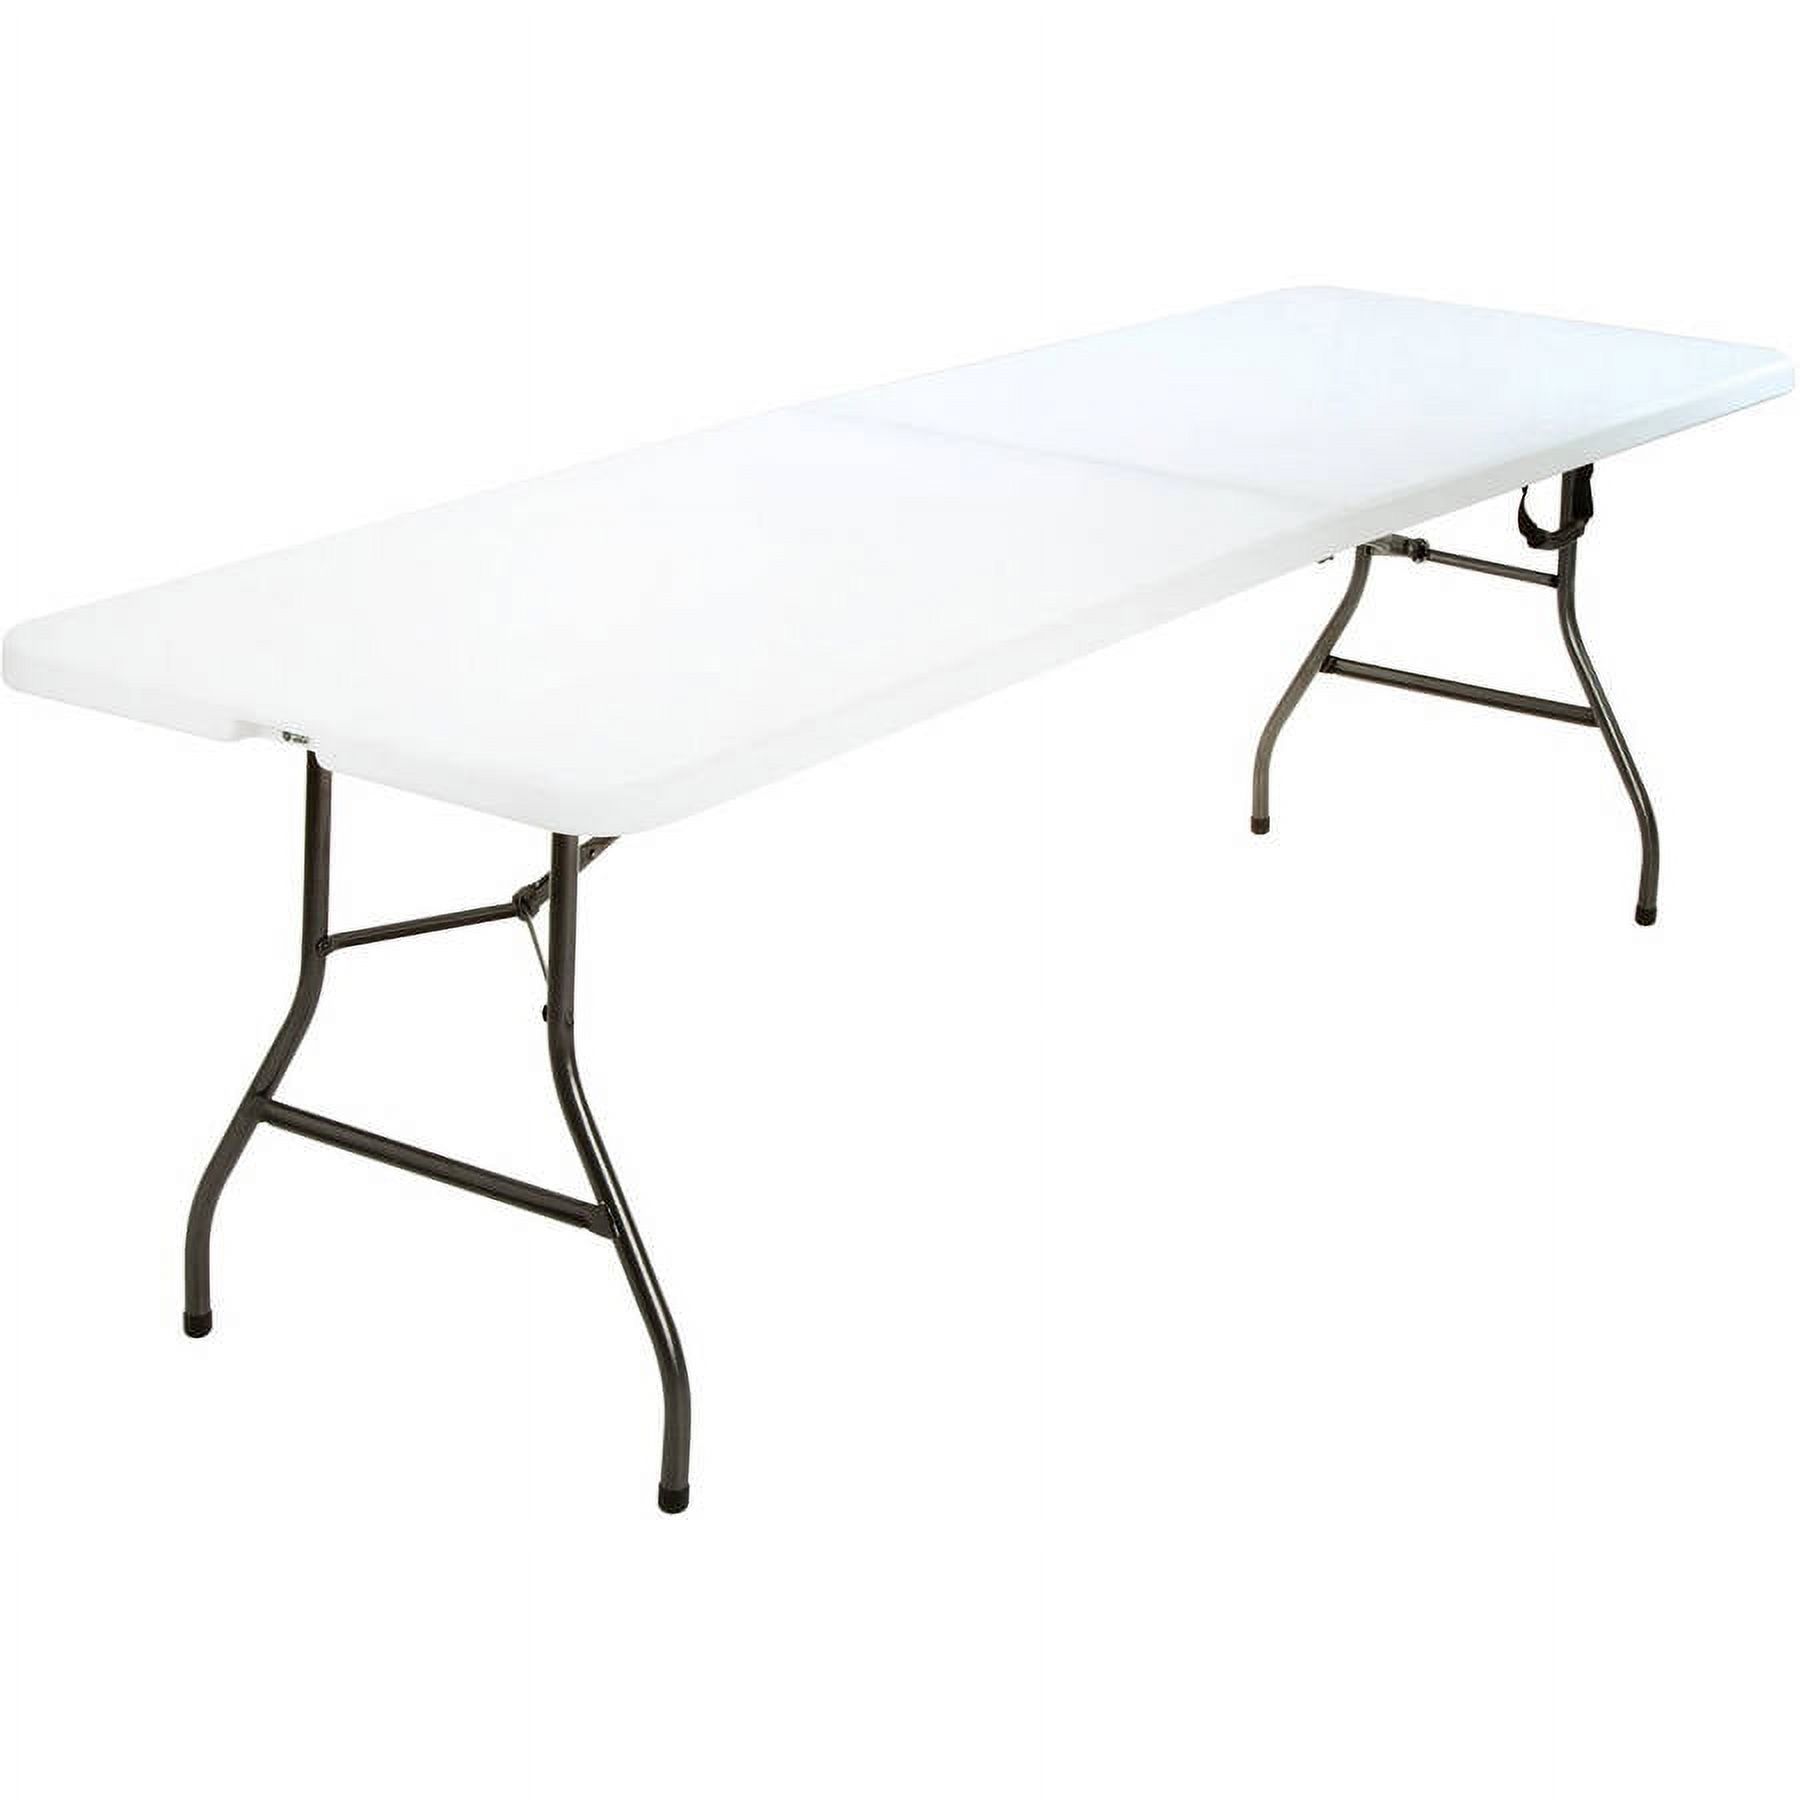 Mainstays 6' Centerfold Table, Multiple Colors - image 1 of 5